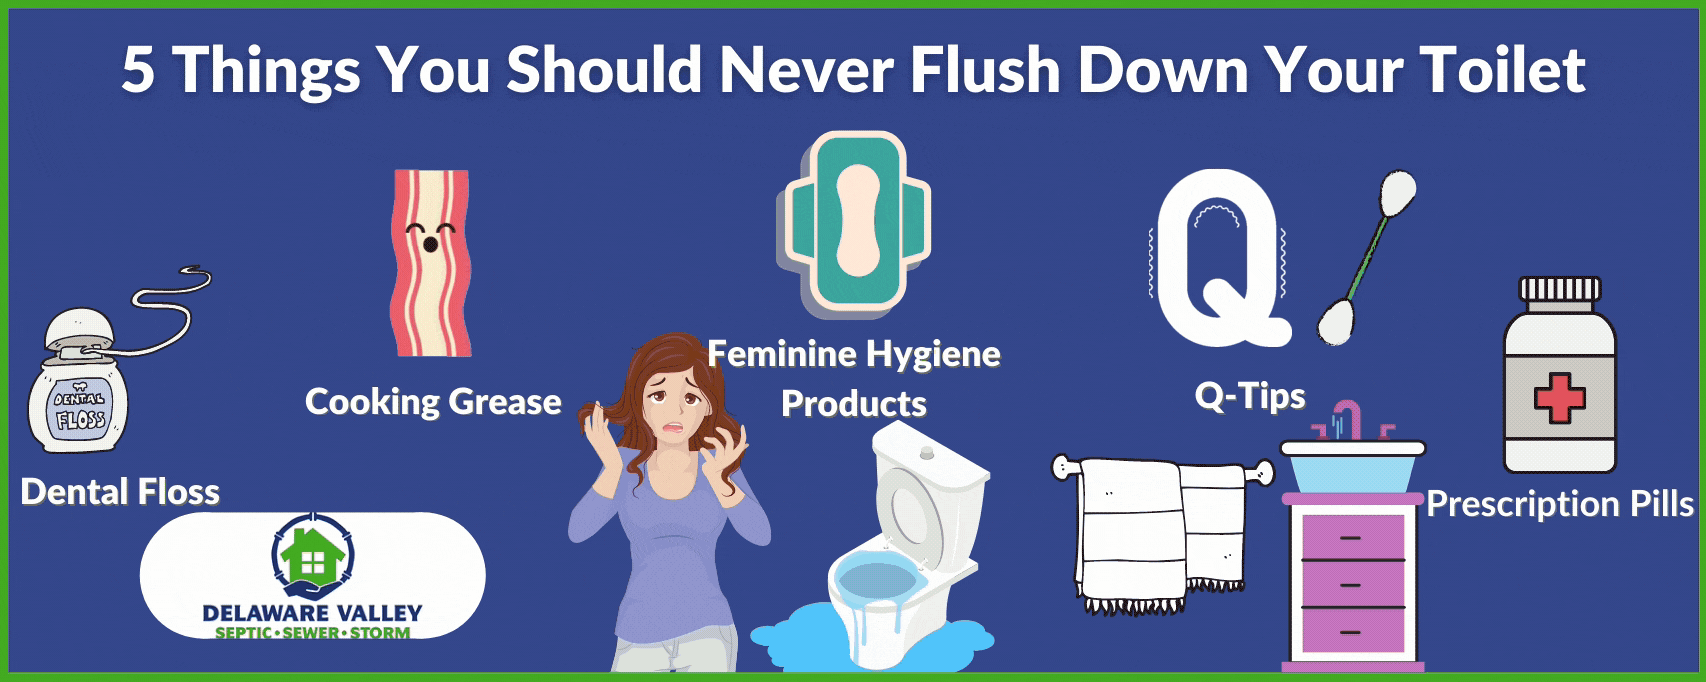 Infographic outlining things that should not be lushed down a toilet